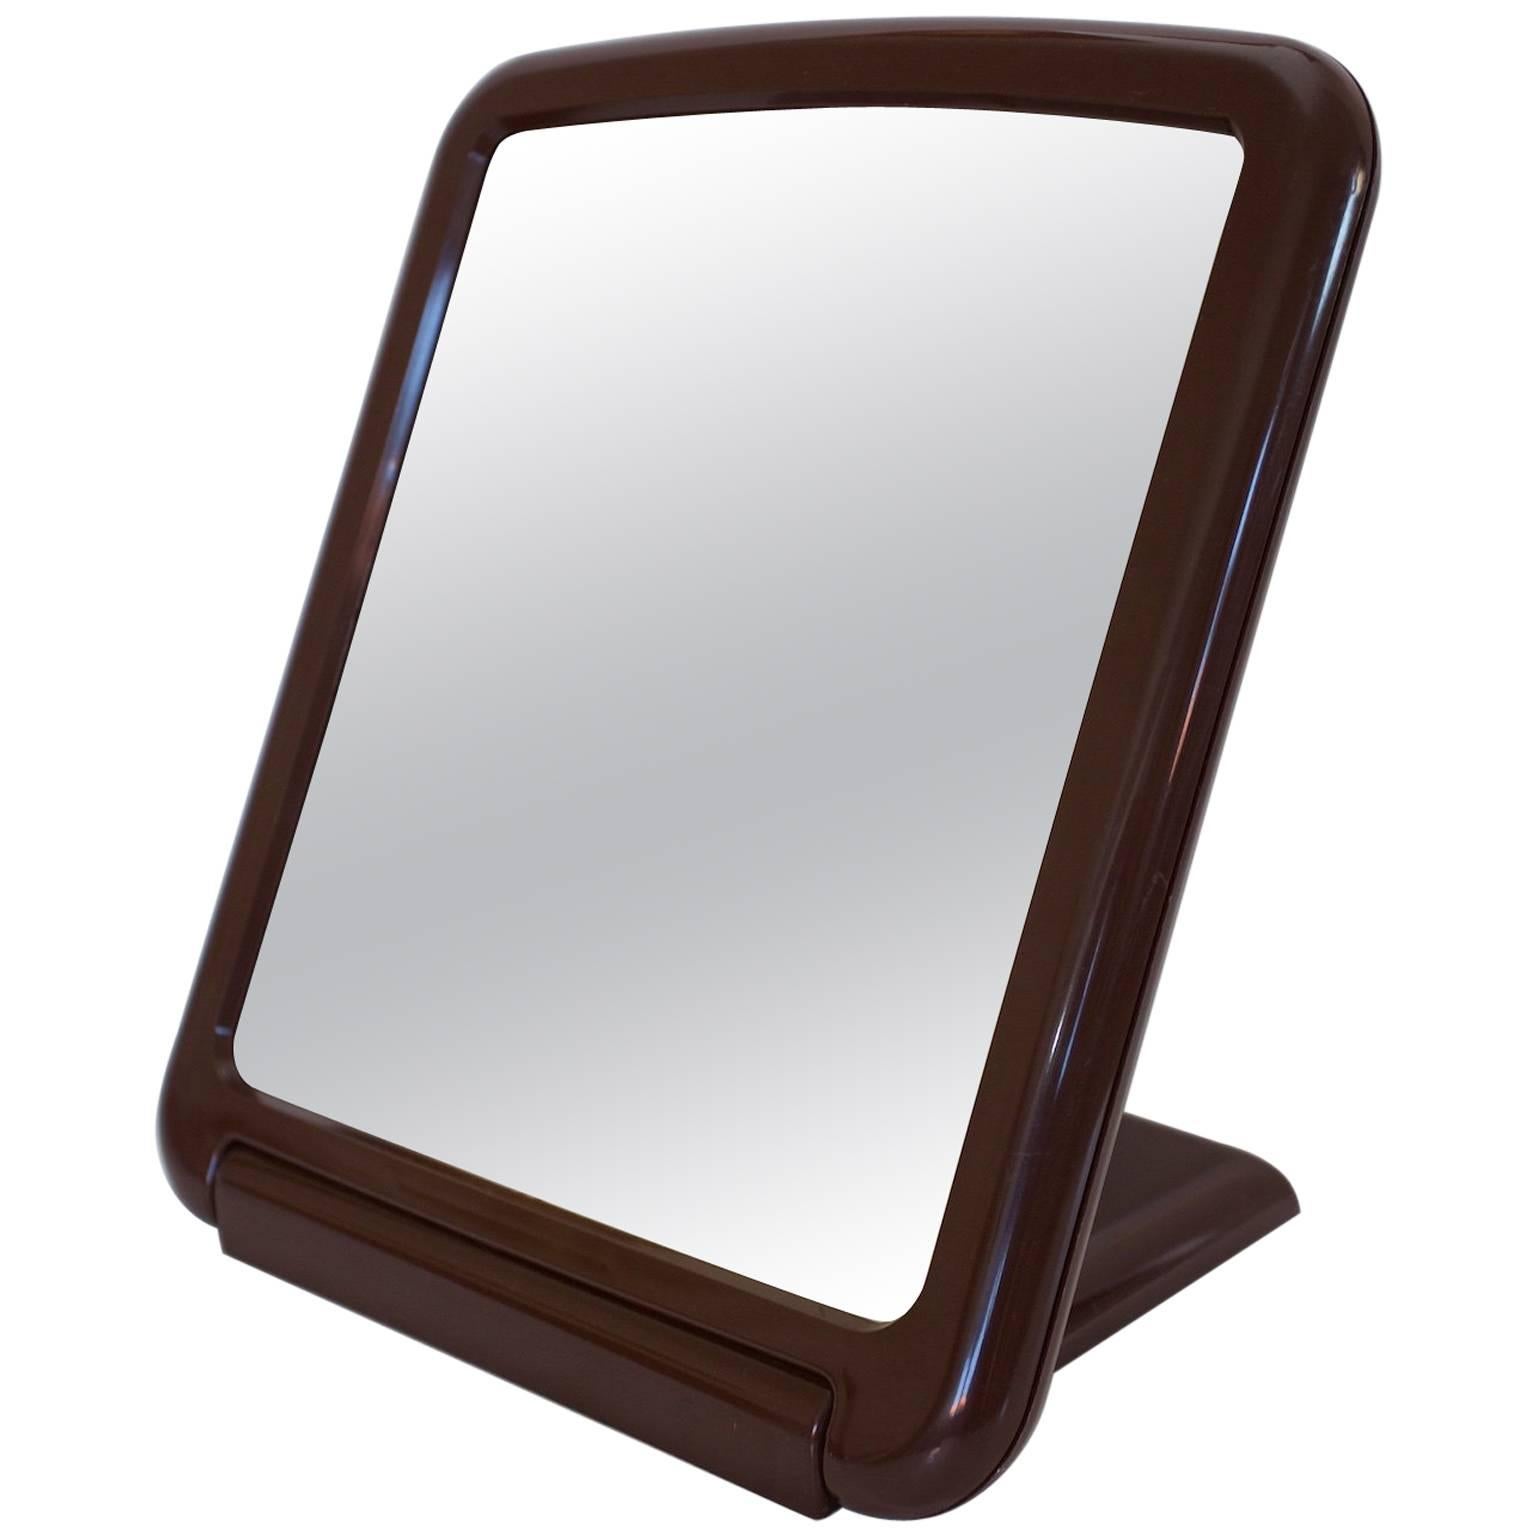 "Finnmirror" Charming Finnish Table and Wall Mirror, Brown Plastic, 1970s For Sale